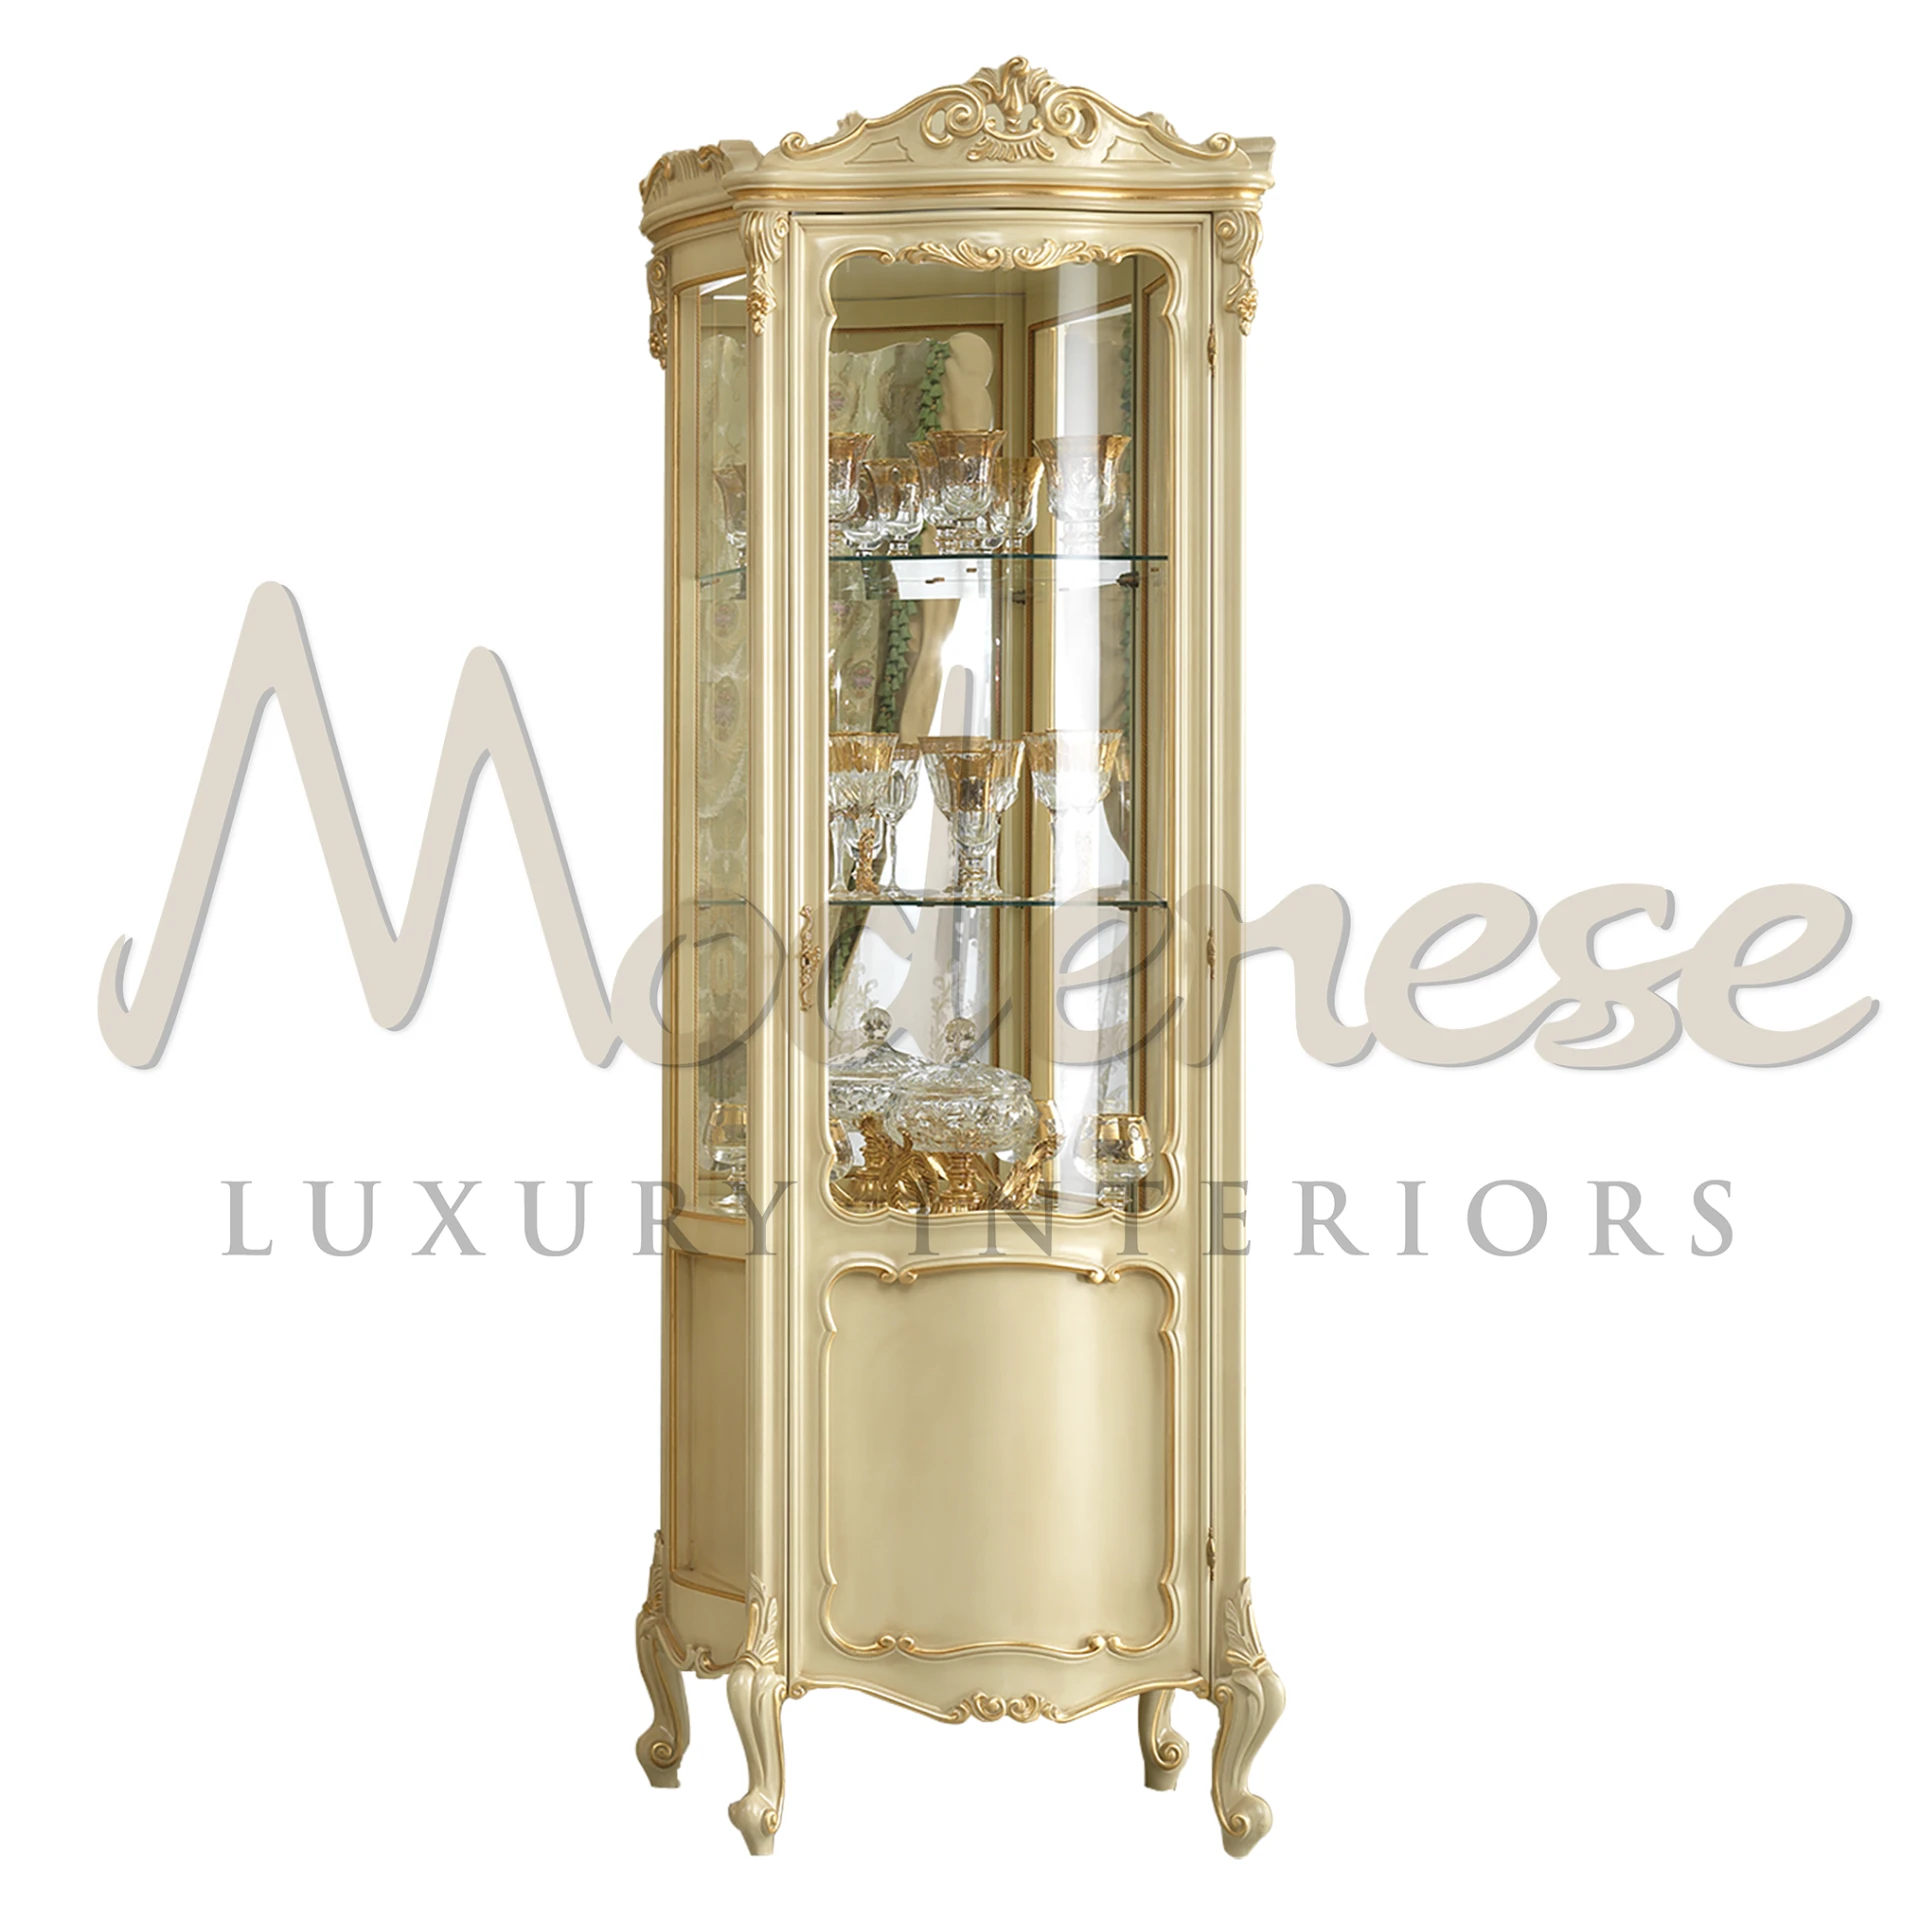 Ivory Royal Baroque Classic Cream 1-Door Cabinet with gold leaf details